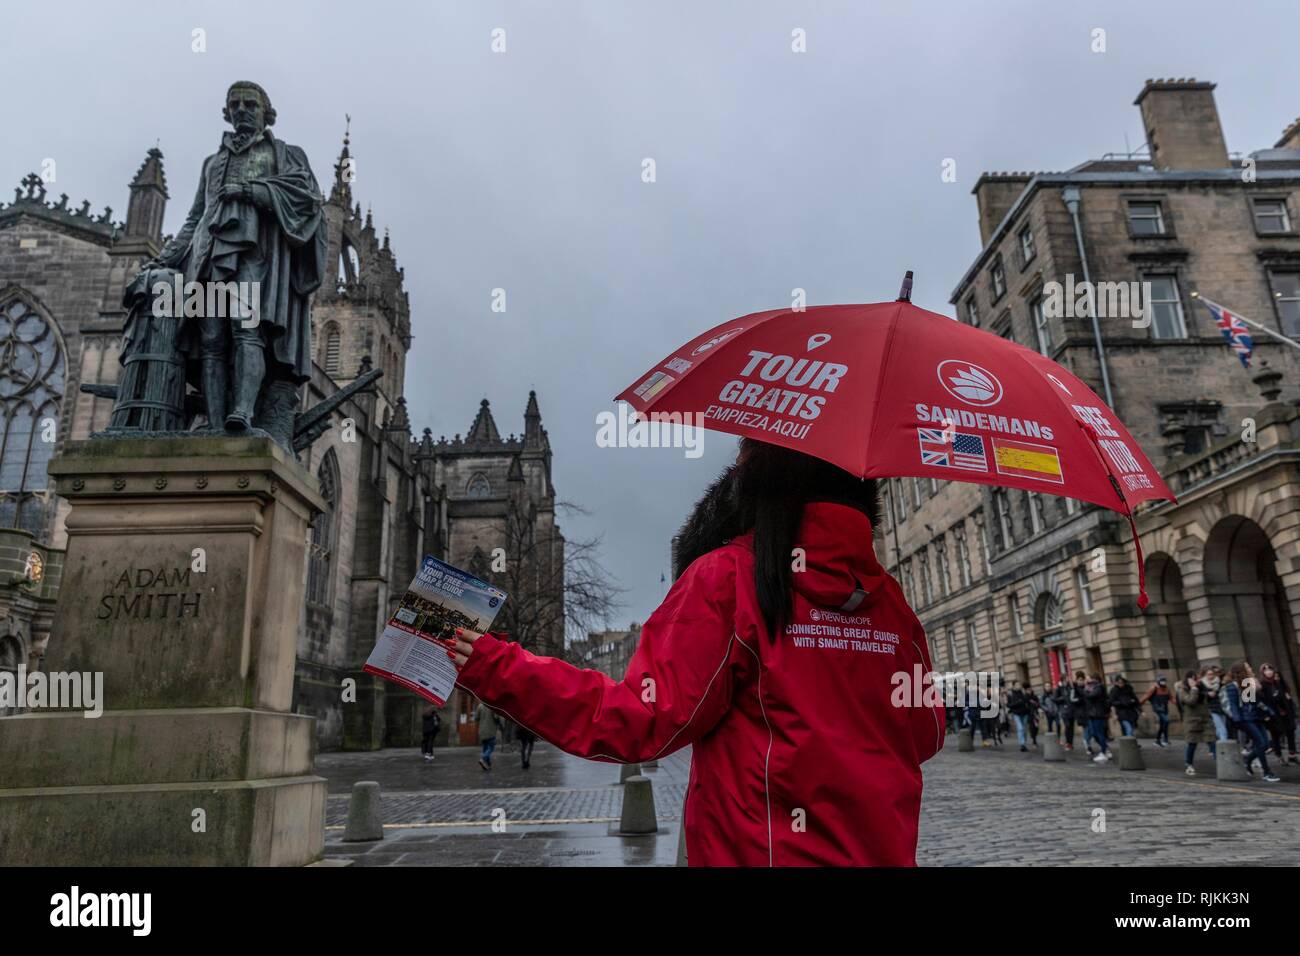 Edinburgh, UK. 07th Feb, 2019. Councillors in Scotland's capital city, Edinburgh, vote on proposals to introduce a tourist tax of £2 per person, per night. The proposals, if approved, will also need legislative change by the Scottish Government which was signalled in the recent Budget. Pictured: One of the many Free Tours sellers on Edinburgh's Royal Mile under a statue of free-market economist, Adam Smith Credit: Rich Dyson/Alamy Live News Stock Photo